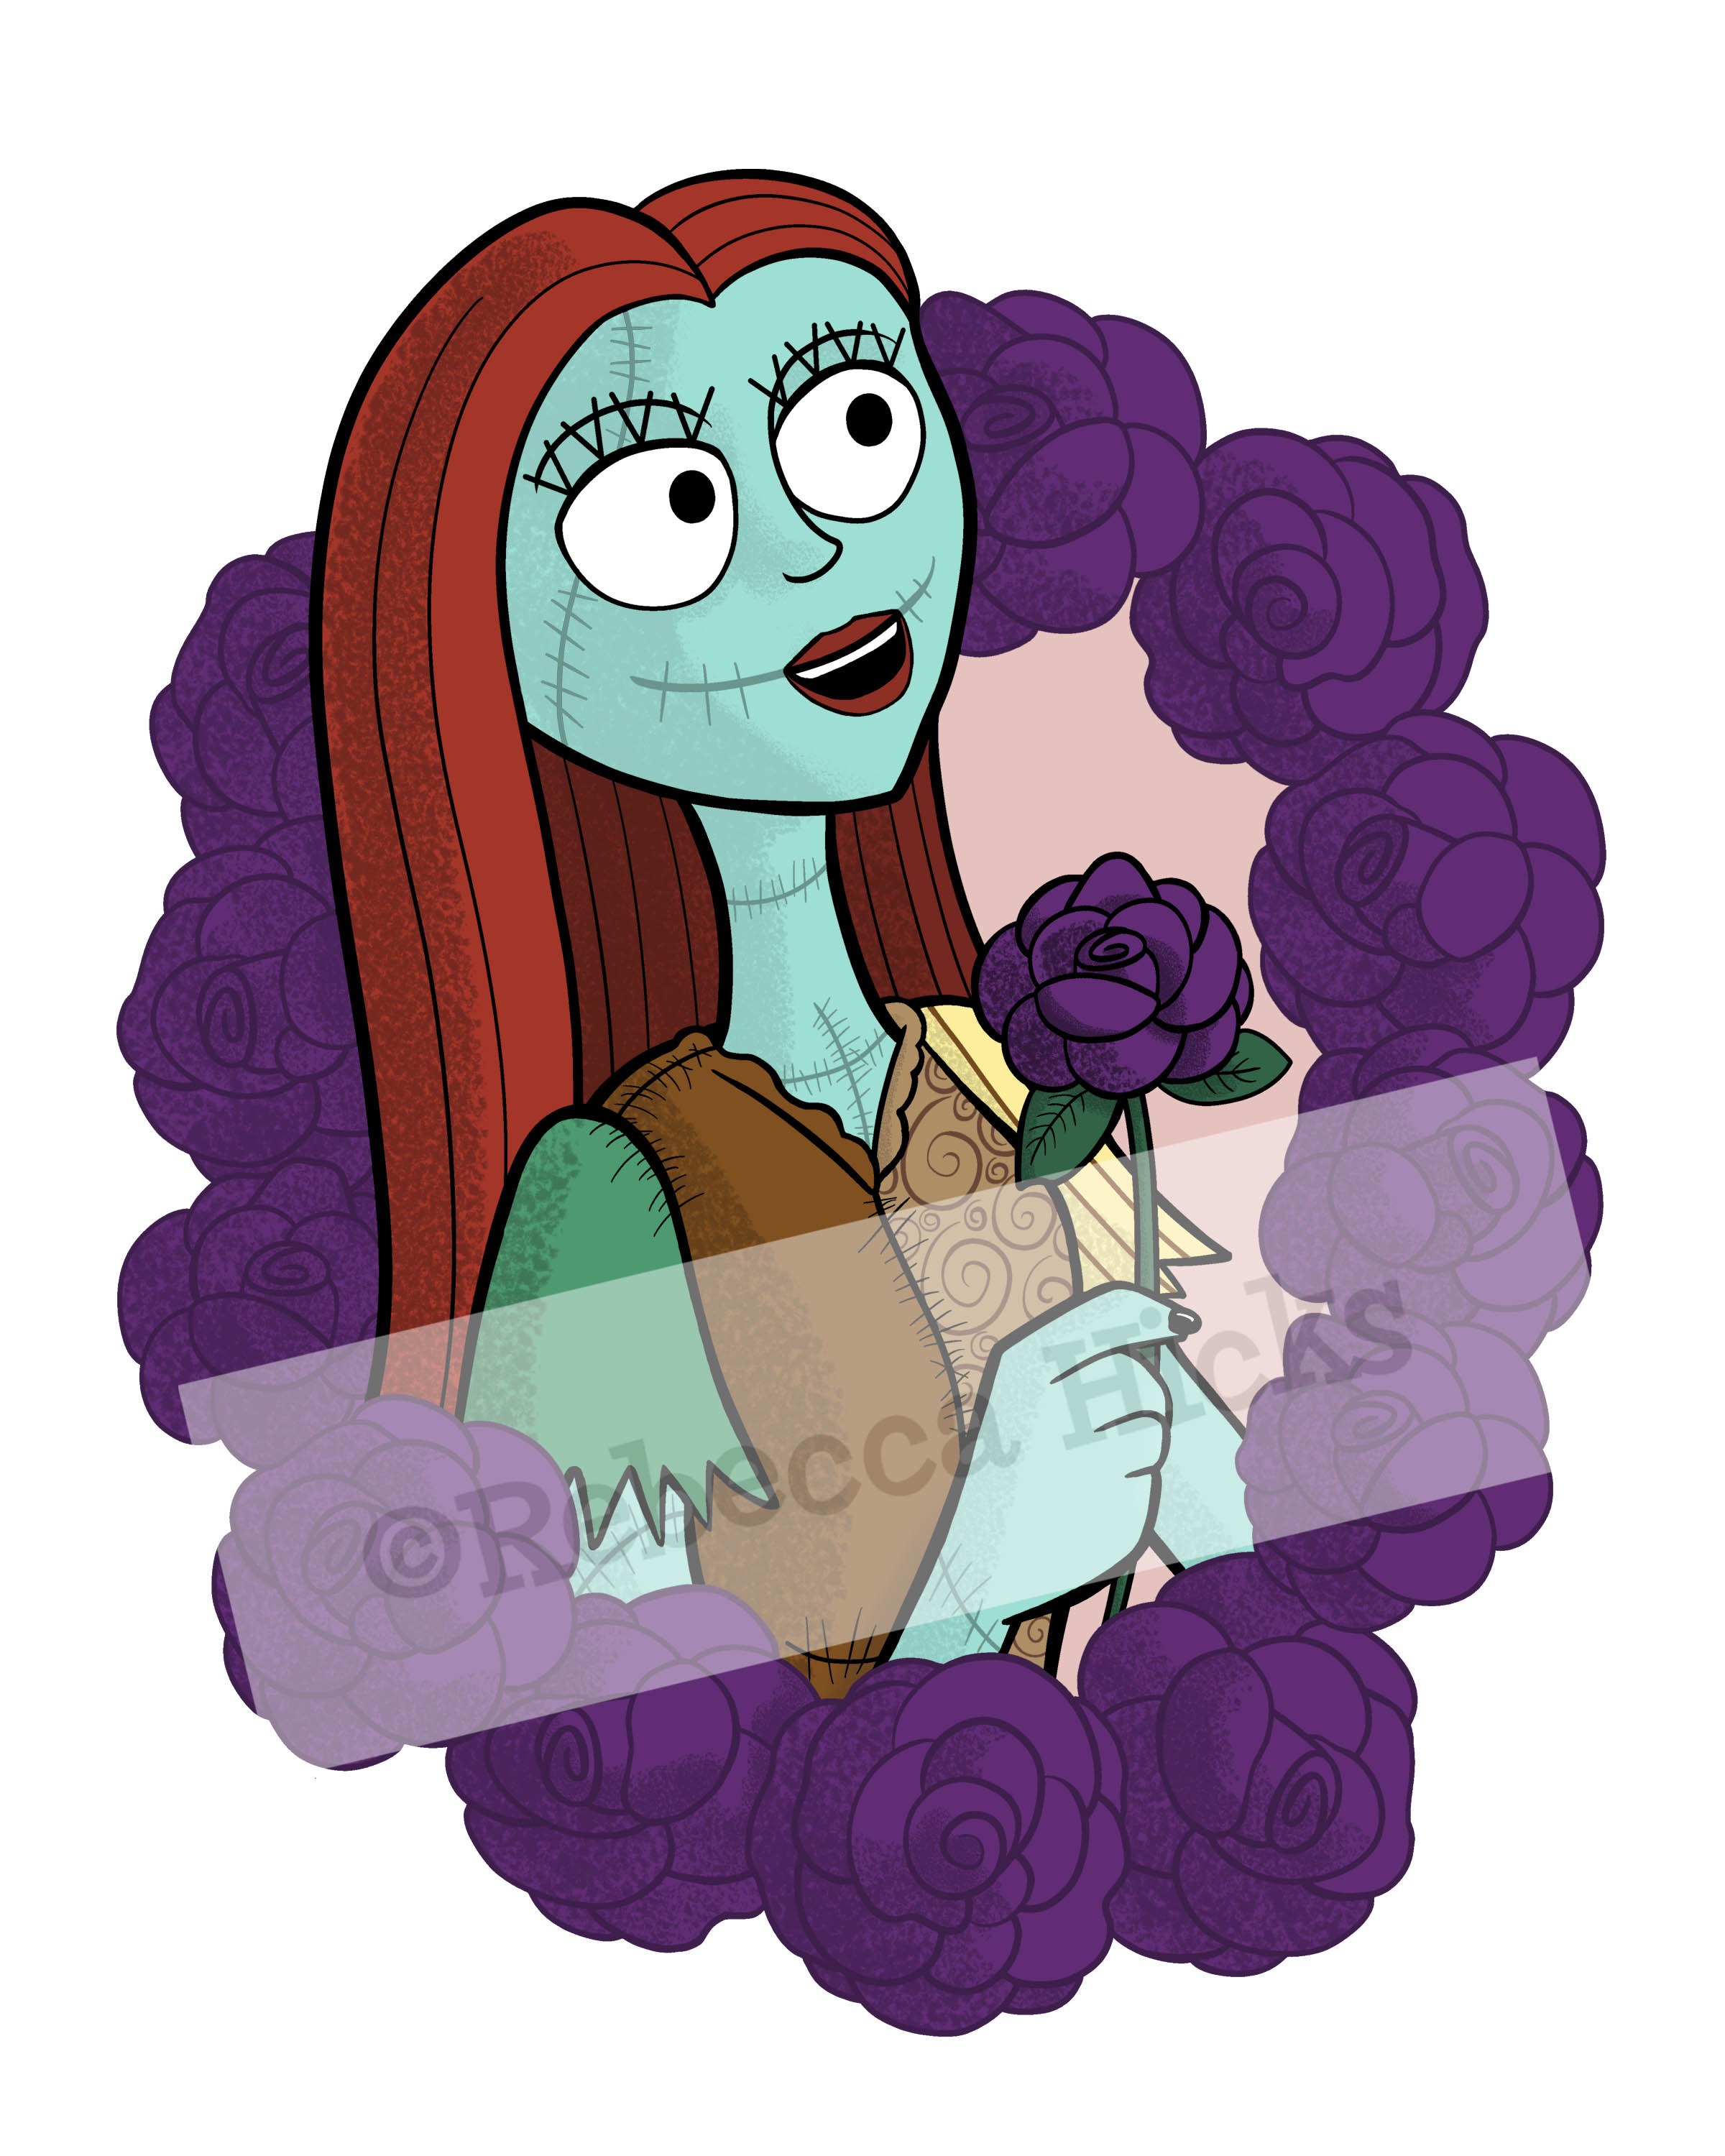 Art print of Sally from The Nightmare Before Christmas wreathed by roses